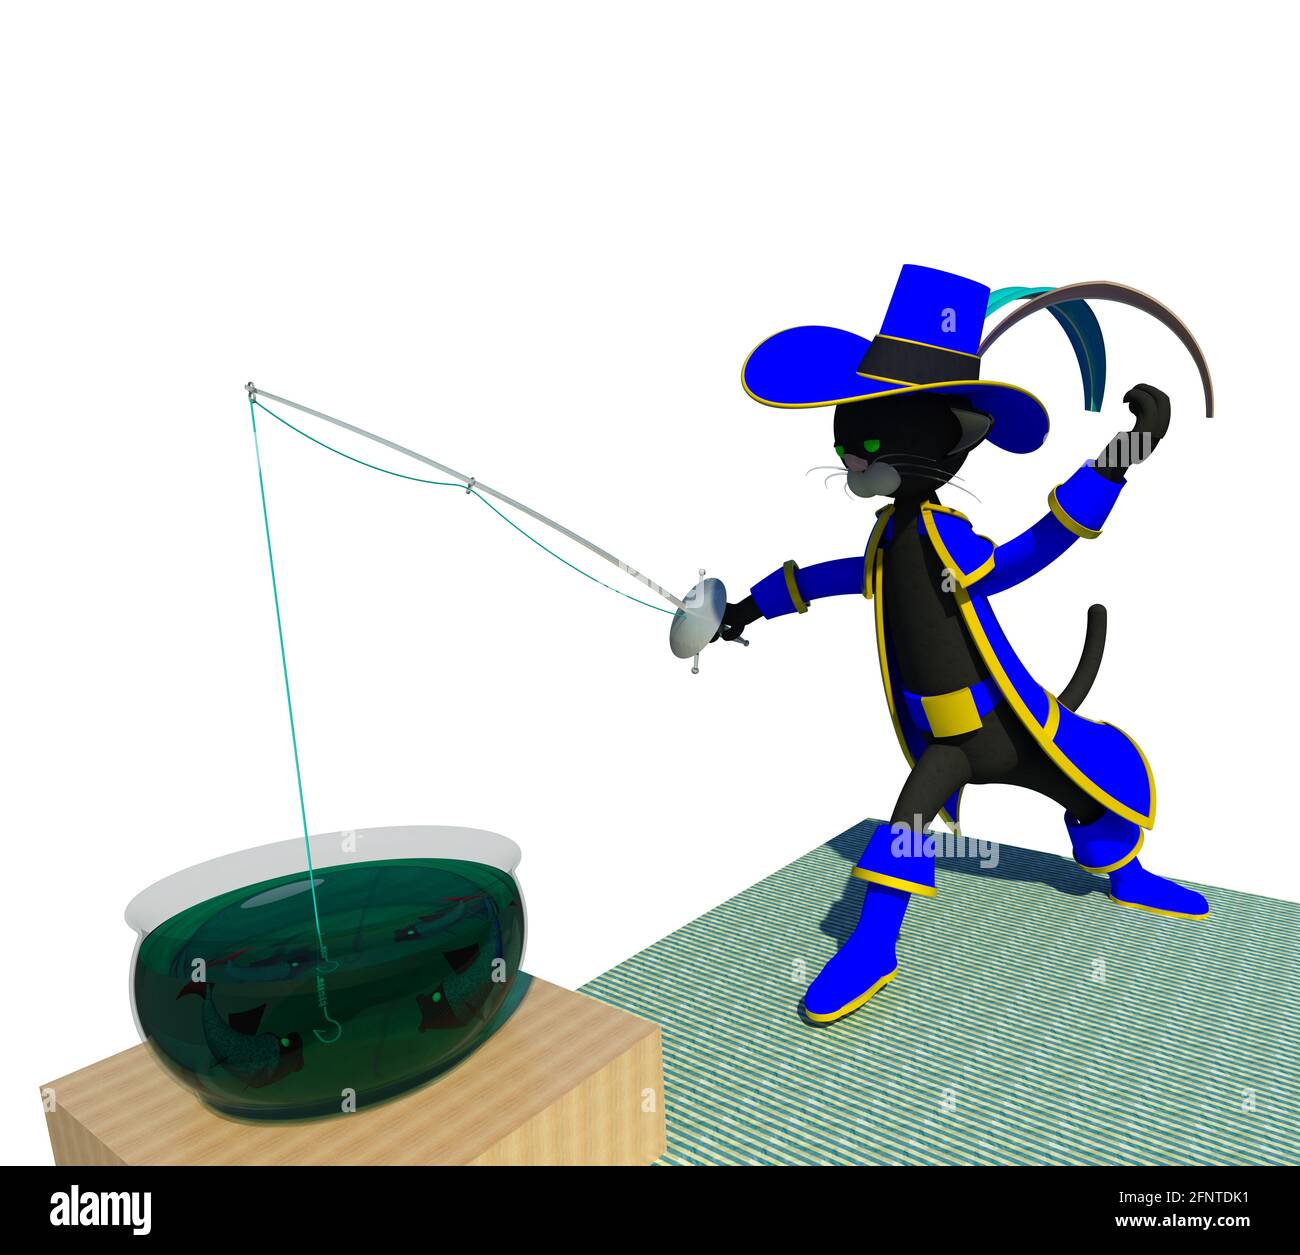 Puss in boots home fishing 3D illustration. Black cat character disguised as fairy tale hero using his rapier to catch fish from  aquarium. Collection Stock Photo